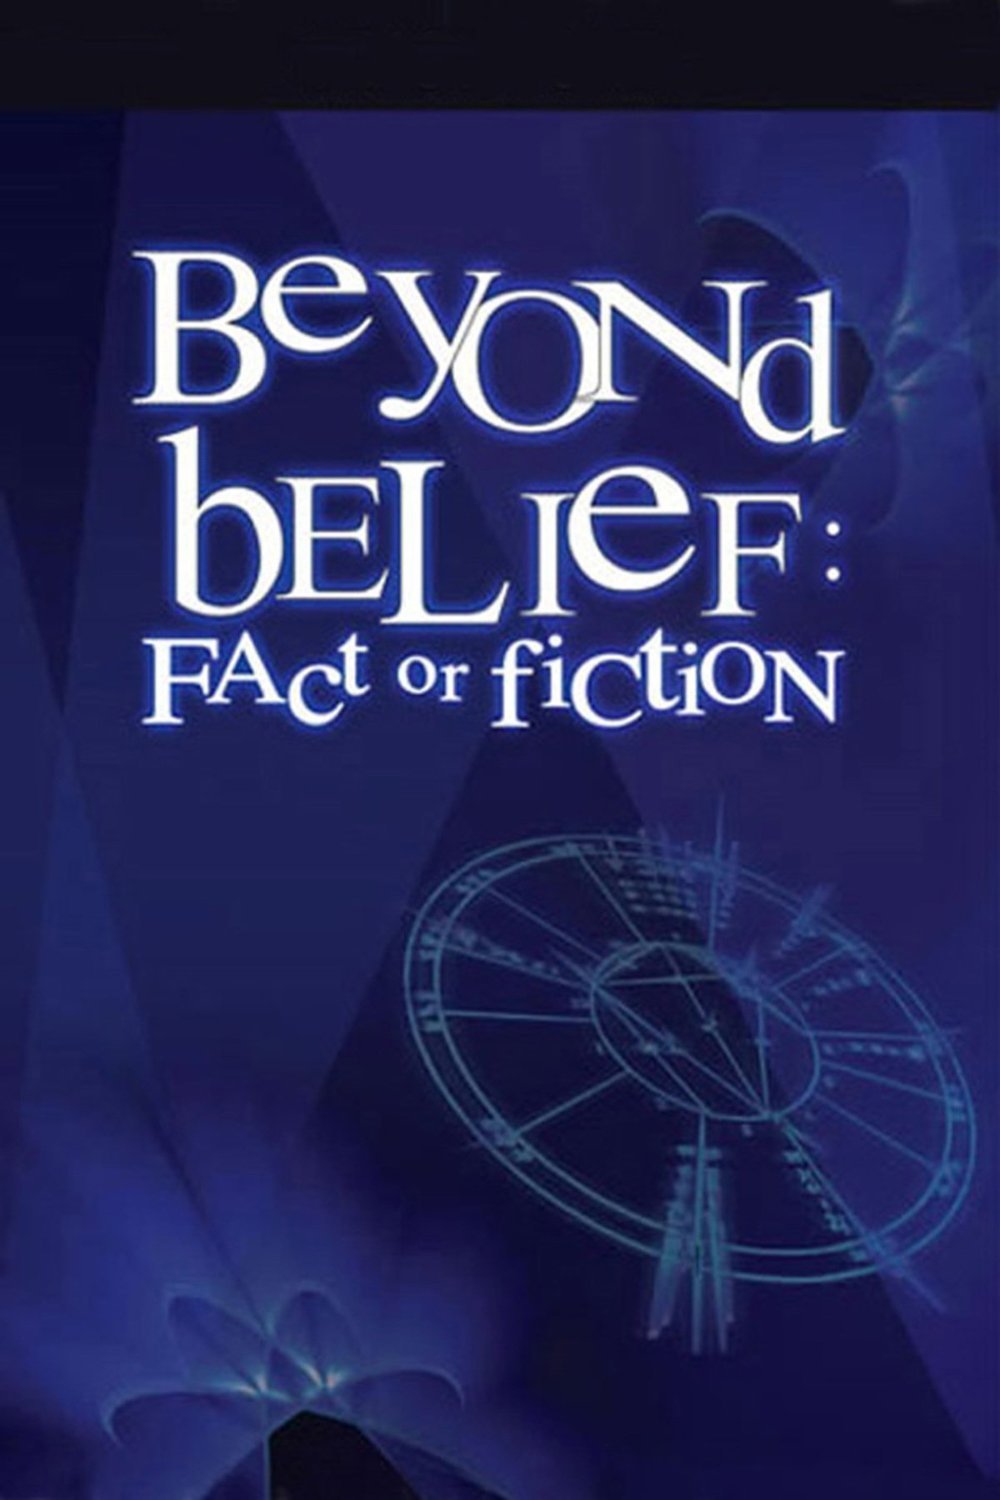 Poster of the movie Beyond Belief: Fact or Fiction